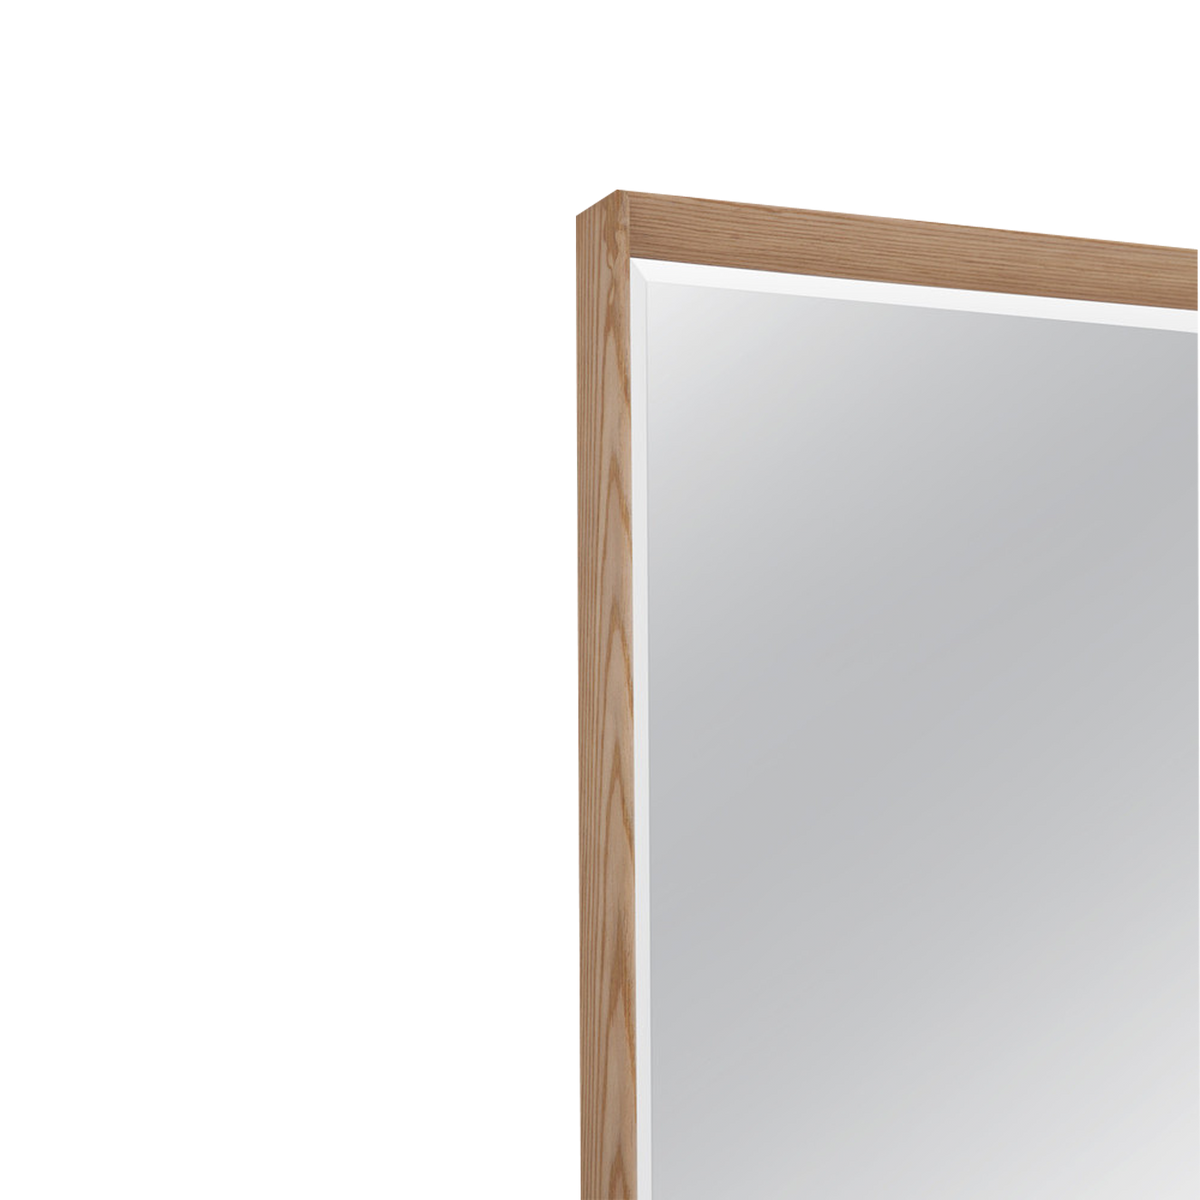 Simple yet stylish floor mirror with natural oak frame.